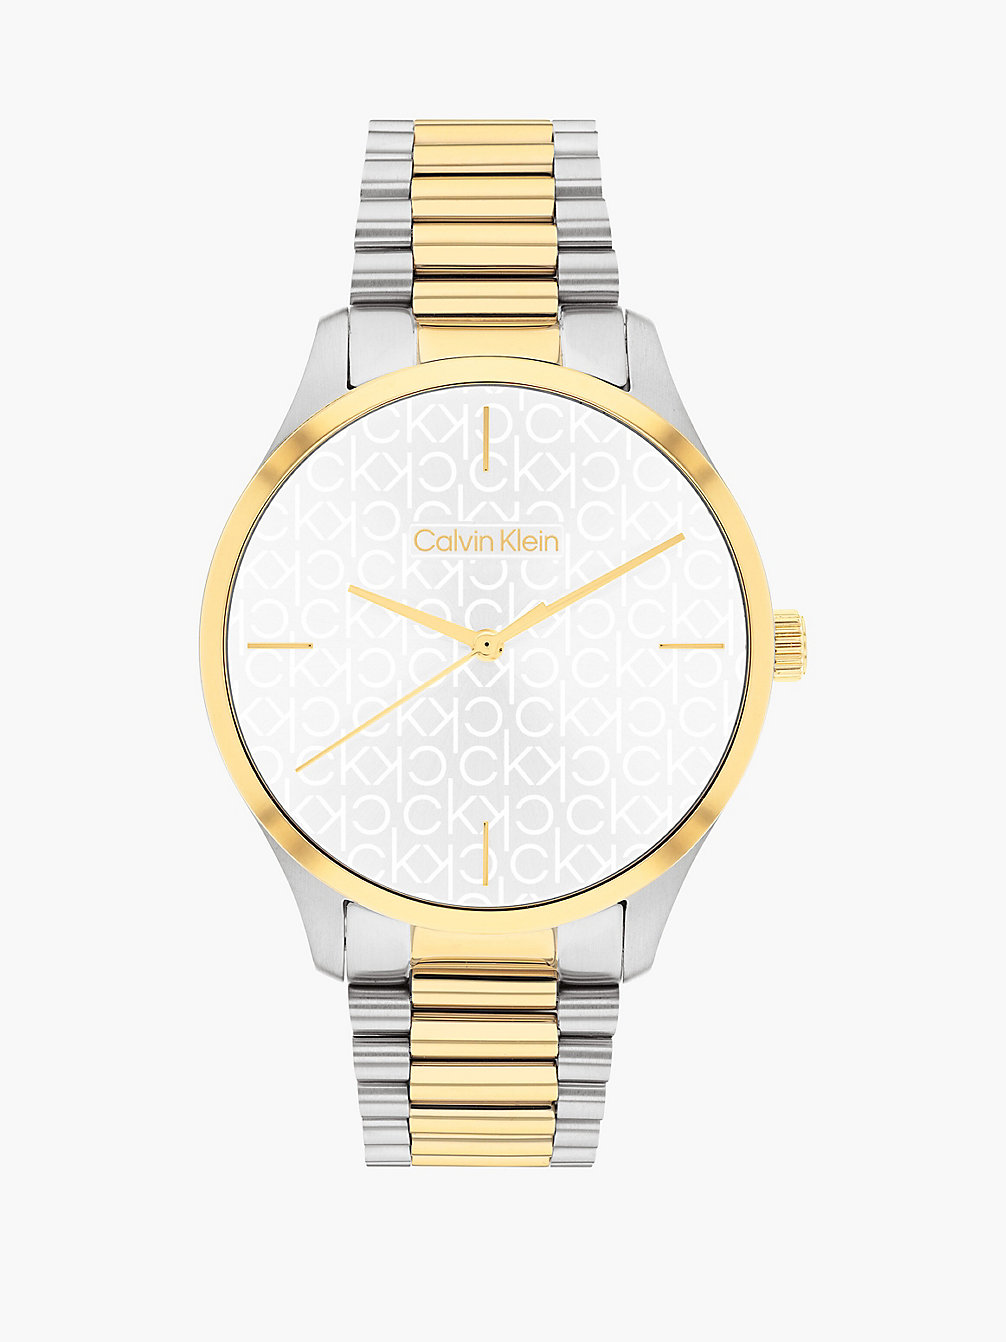 Montre - Iconic > TWO TONE > undefined Unisex > Calvin Klein